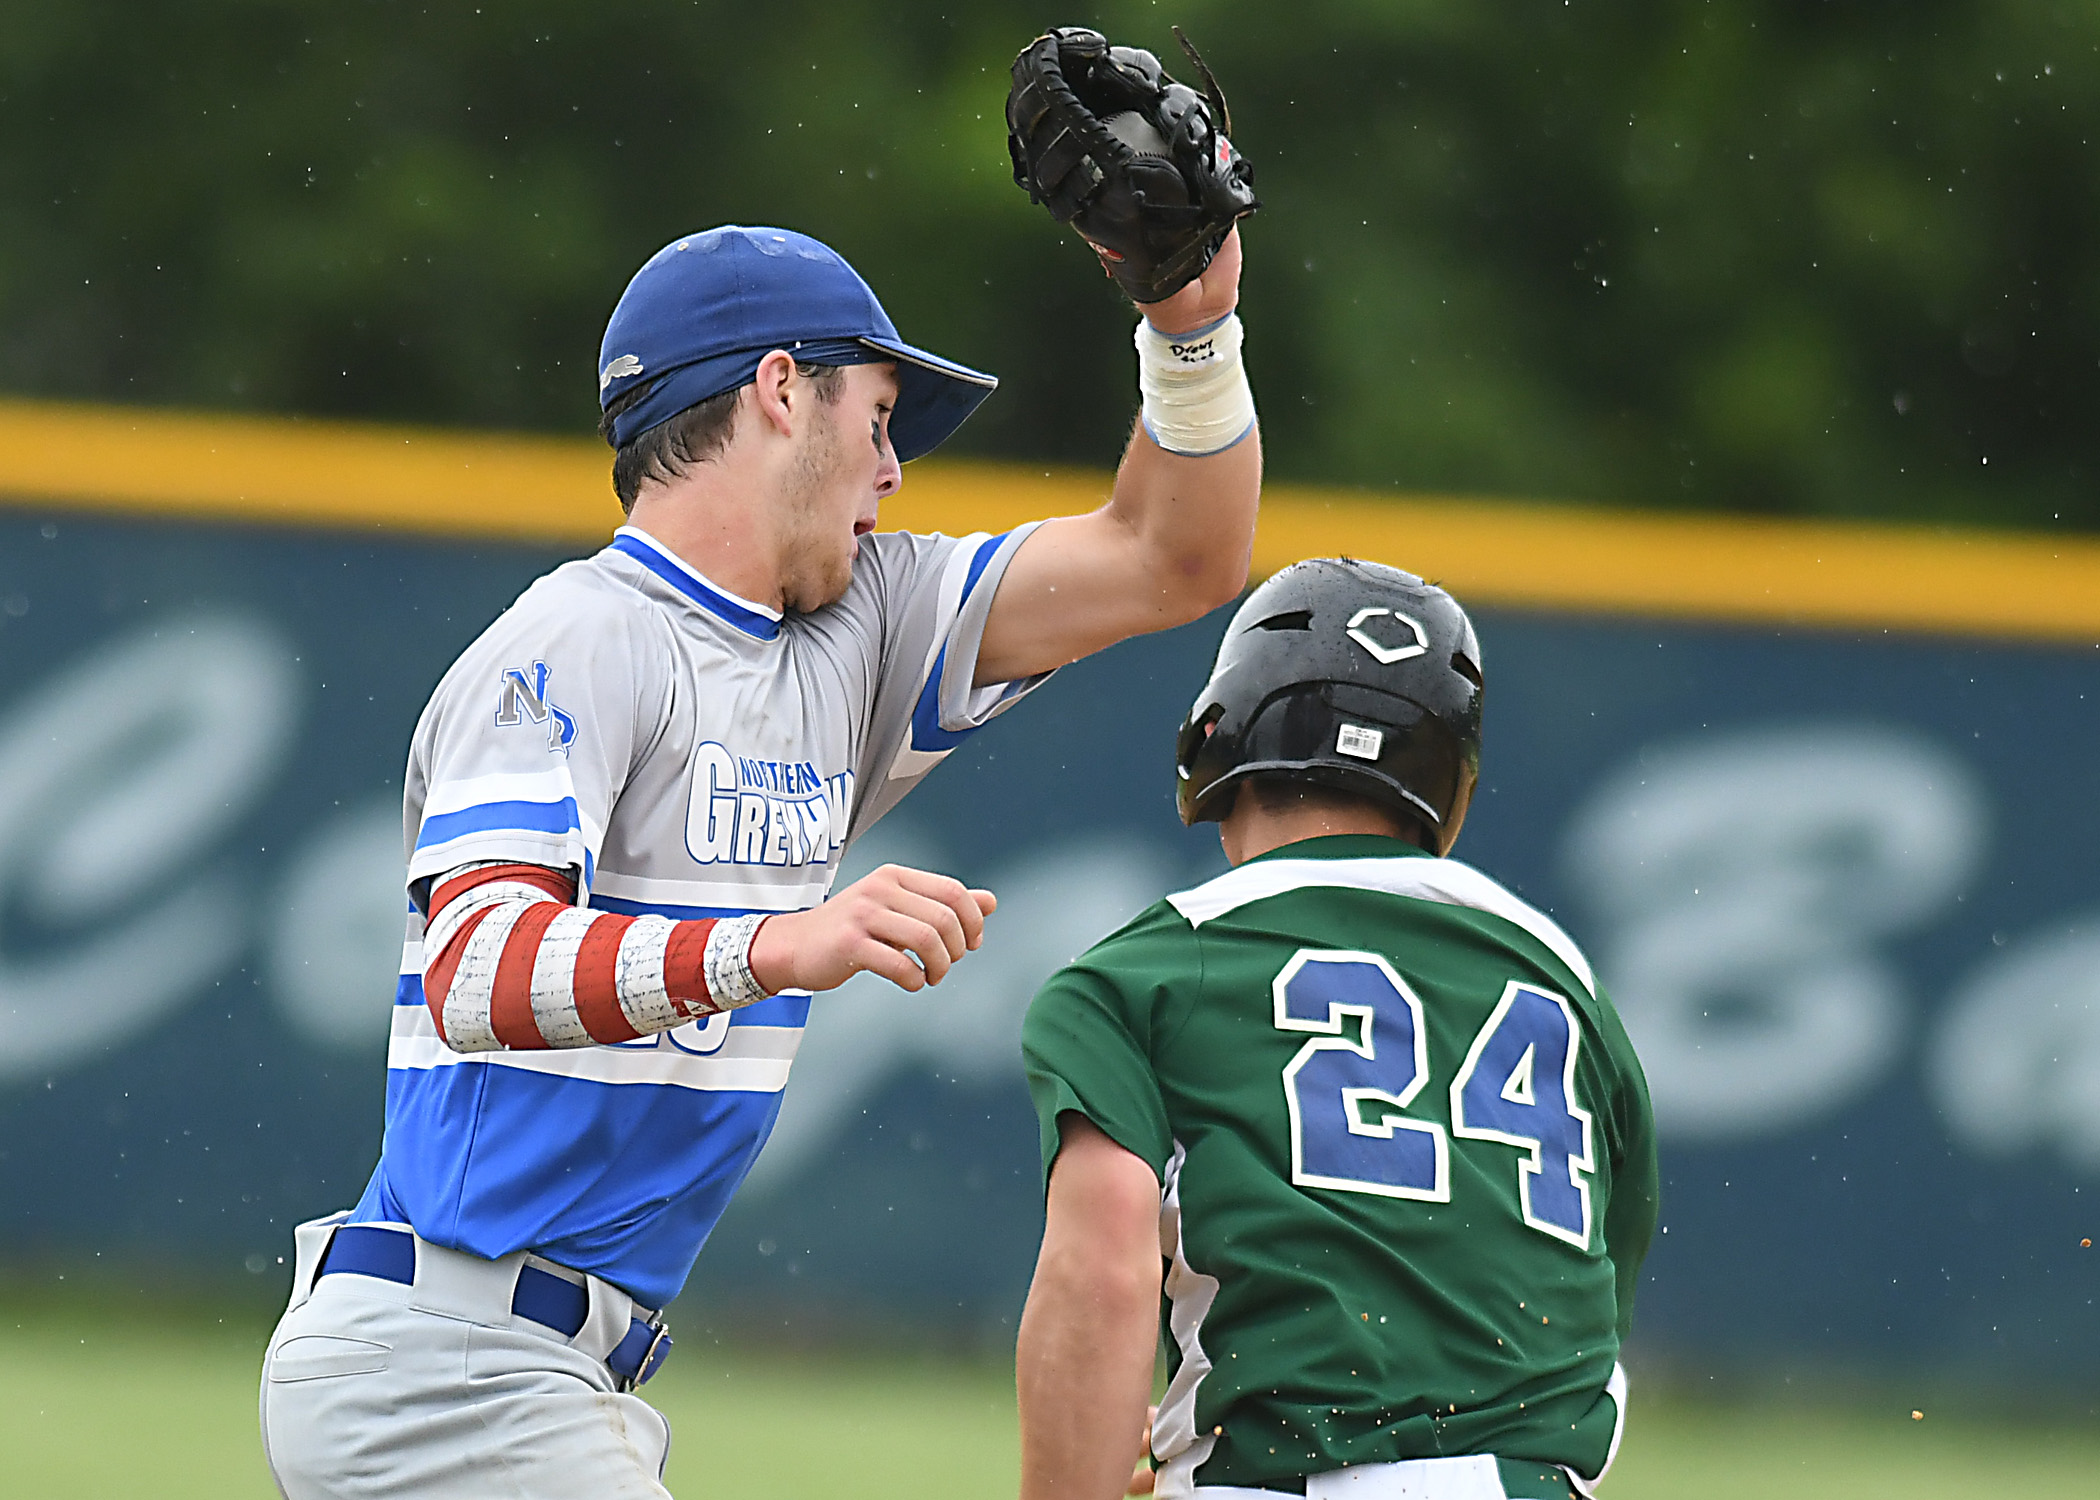 Baseball 20 in 2020 – No. 18: Colts Neck